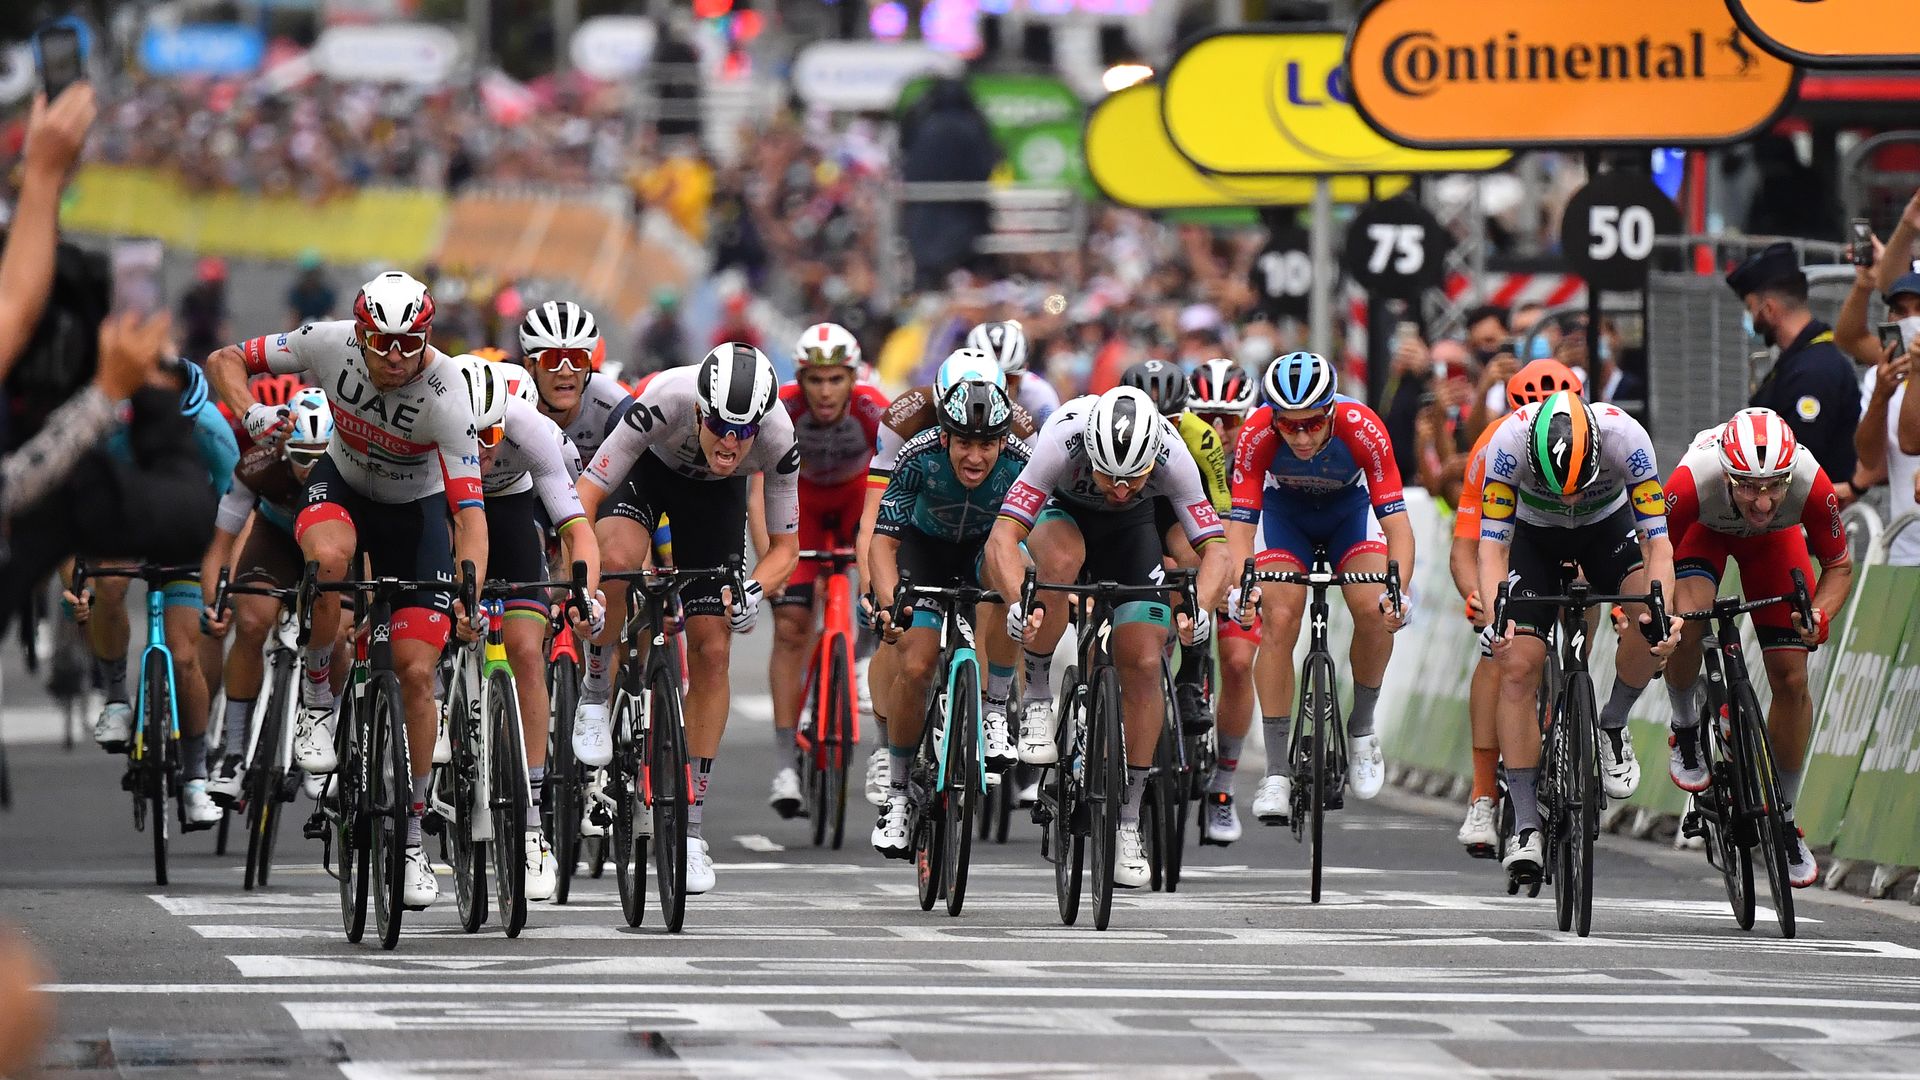 Cyclists during the 107th Tour de France 2020, Stage 1, on Aug. 29.